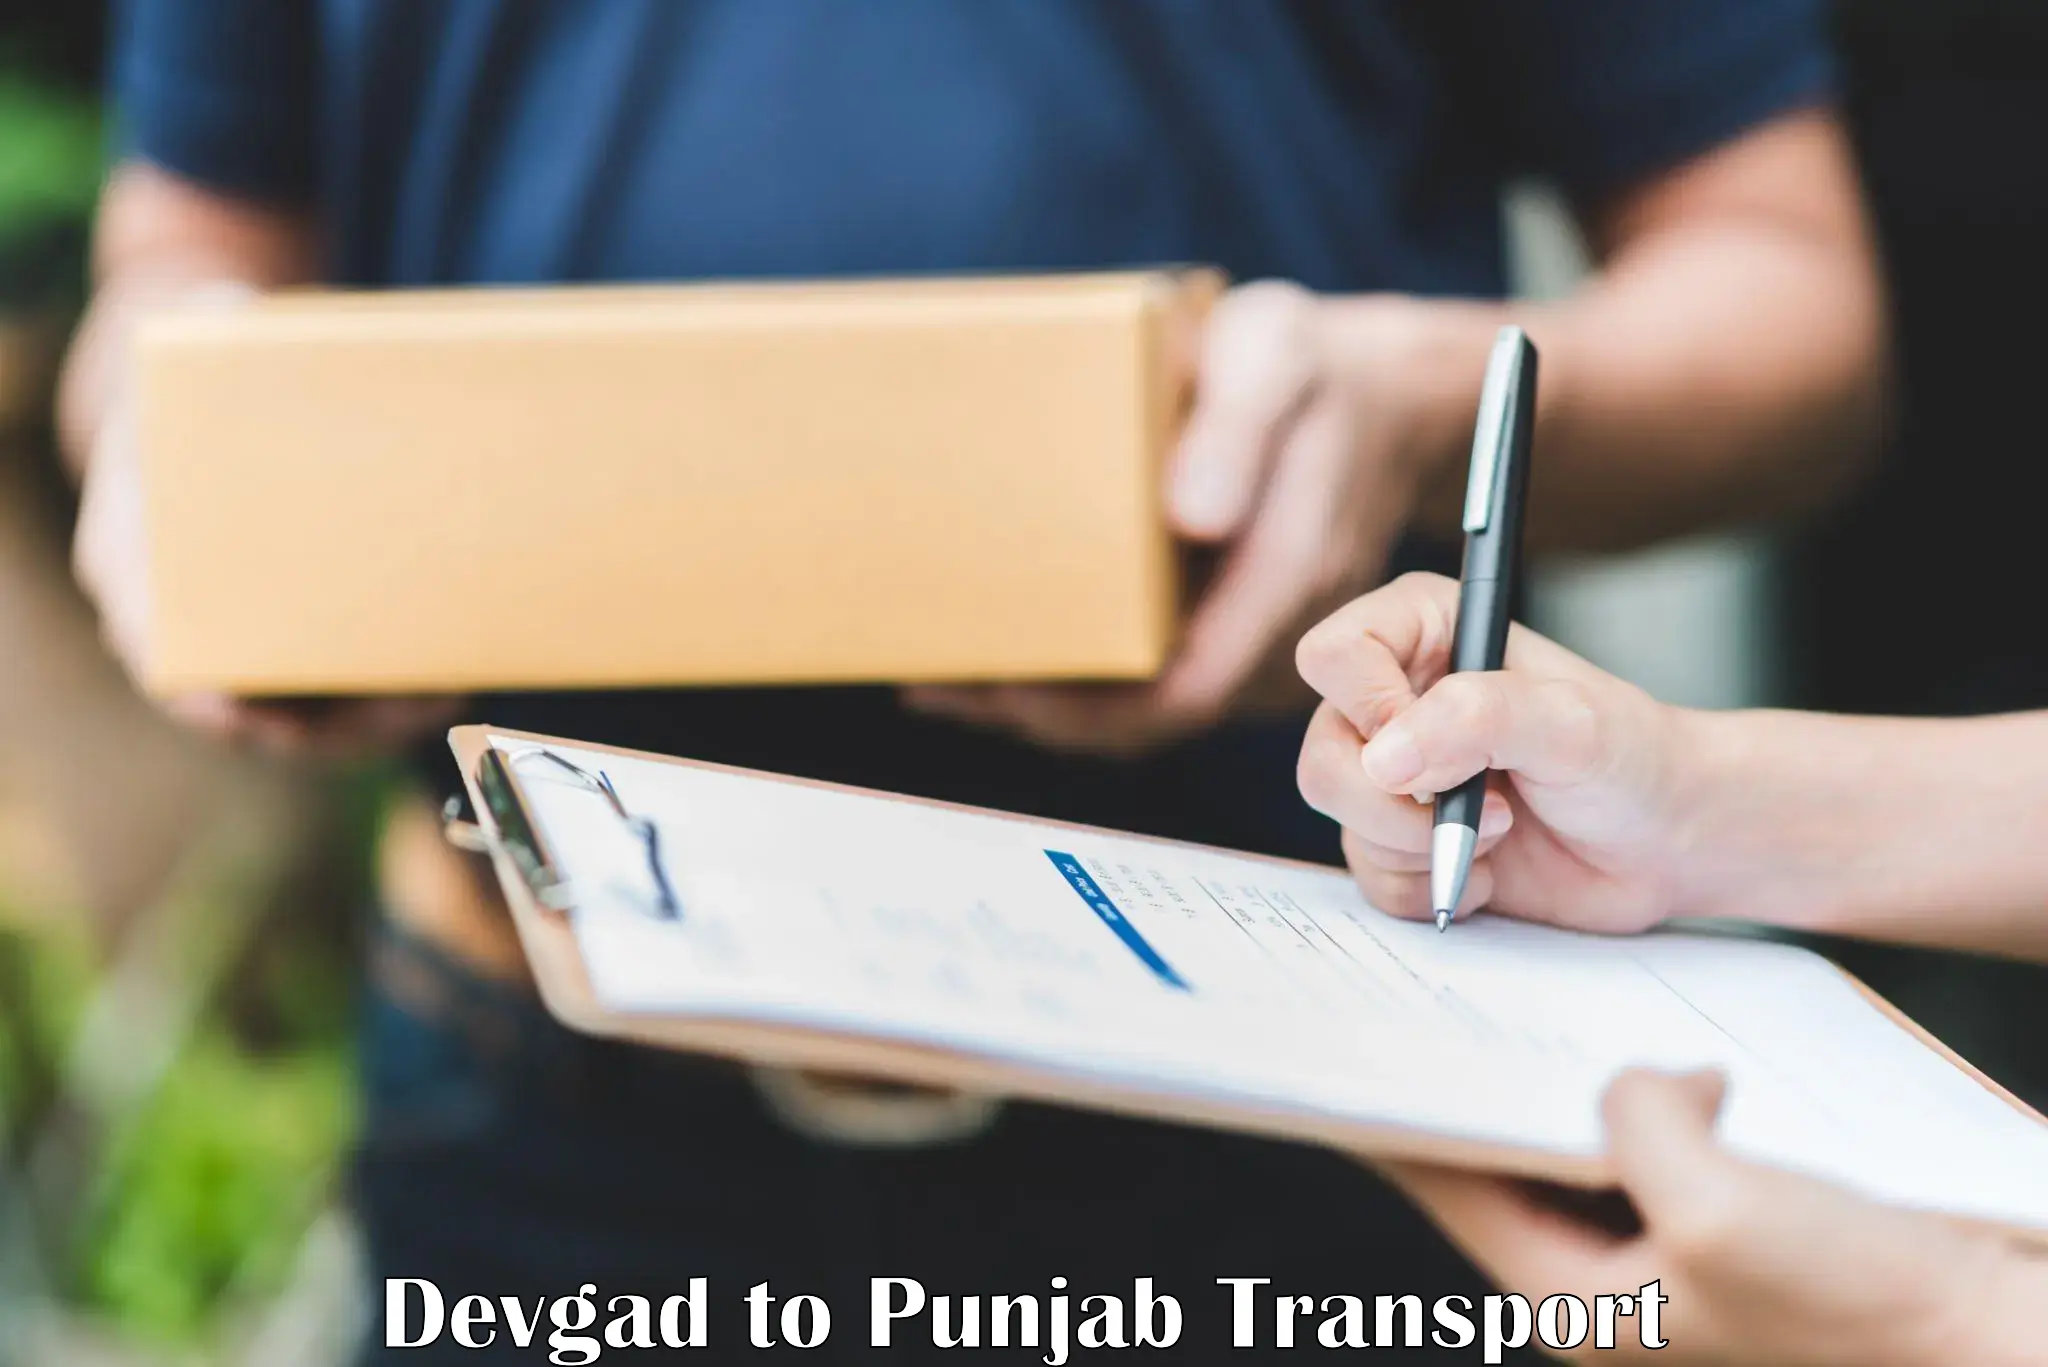 Cycle transportation service Devgad to Sultanpur Lodhi